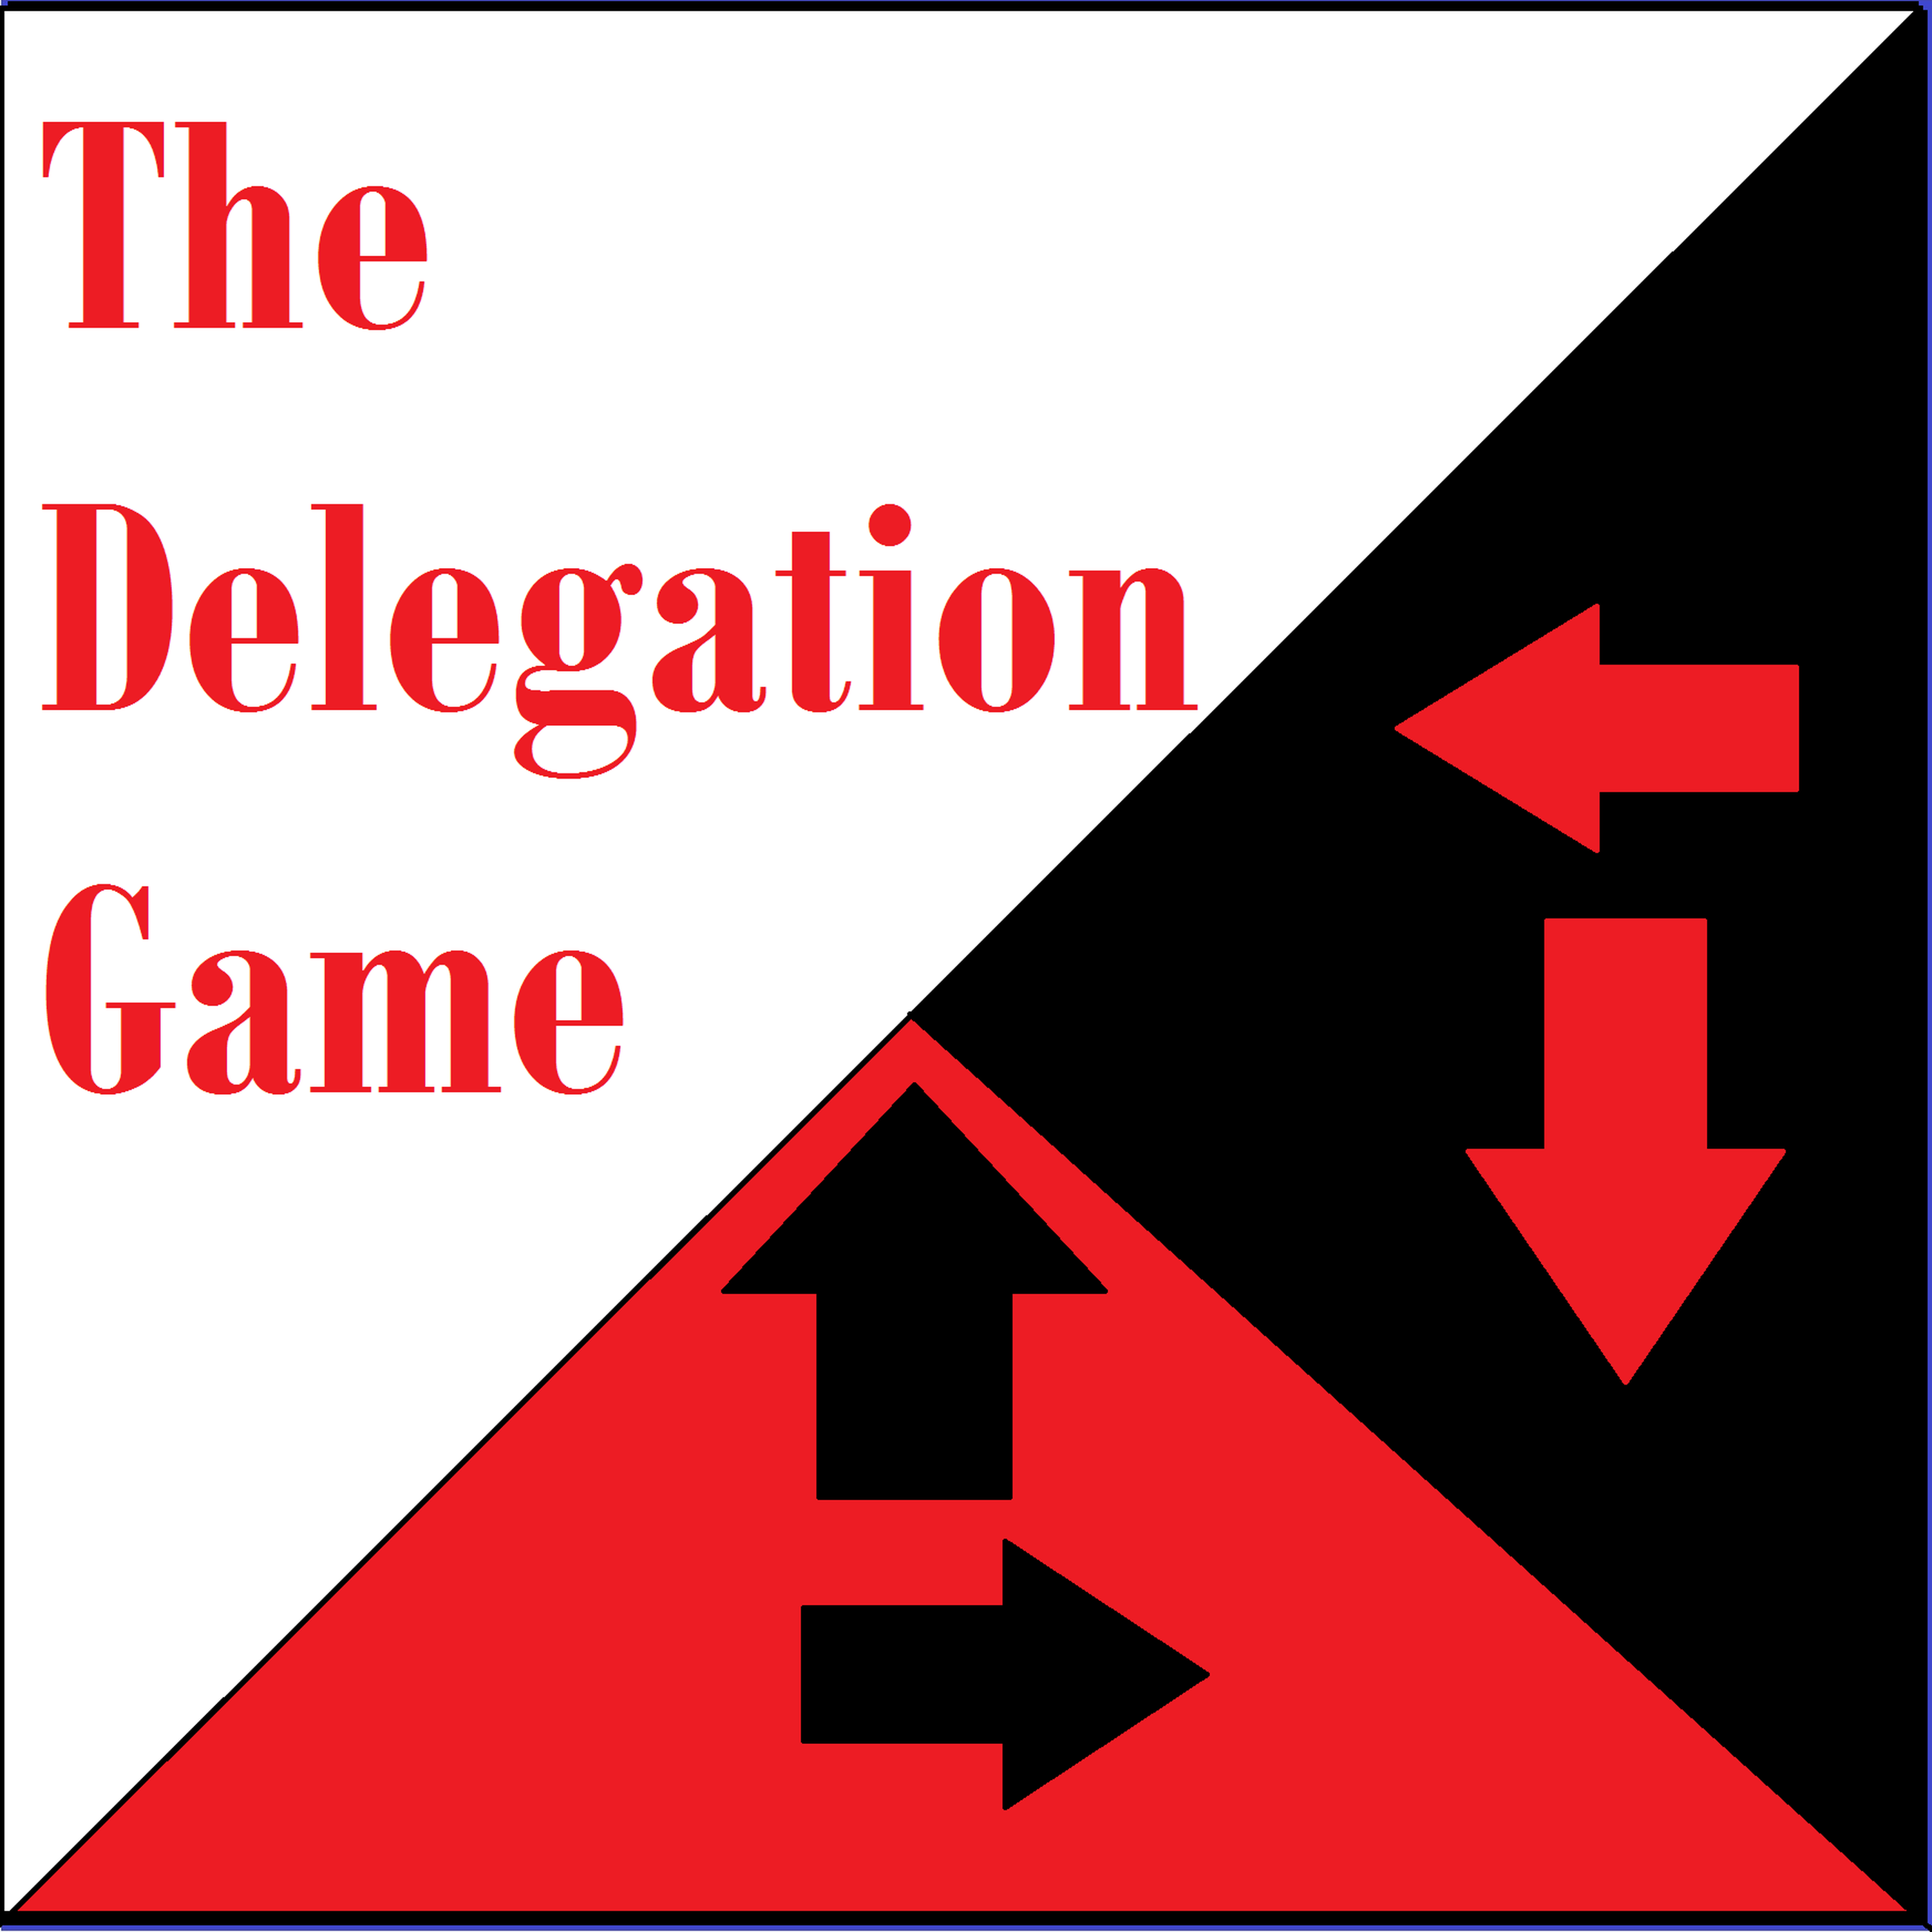 Delegation Game #11: Victory in Defeat